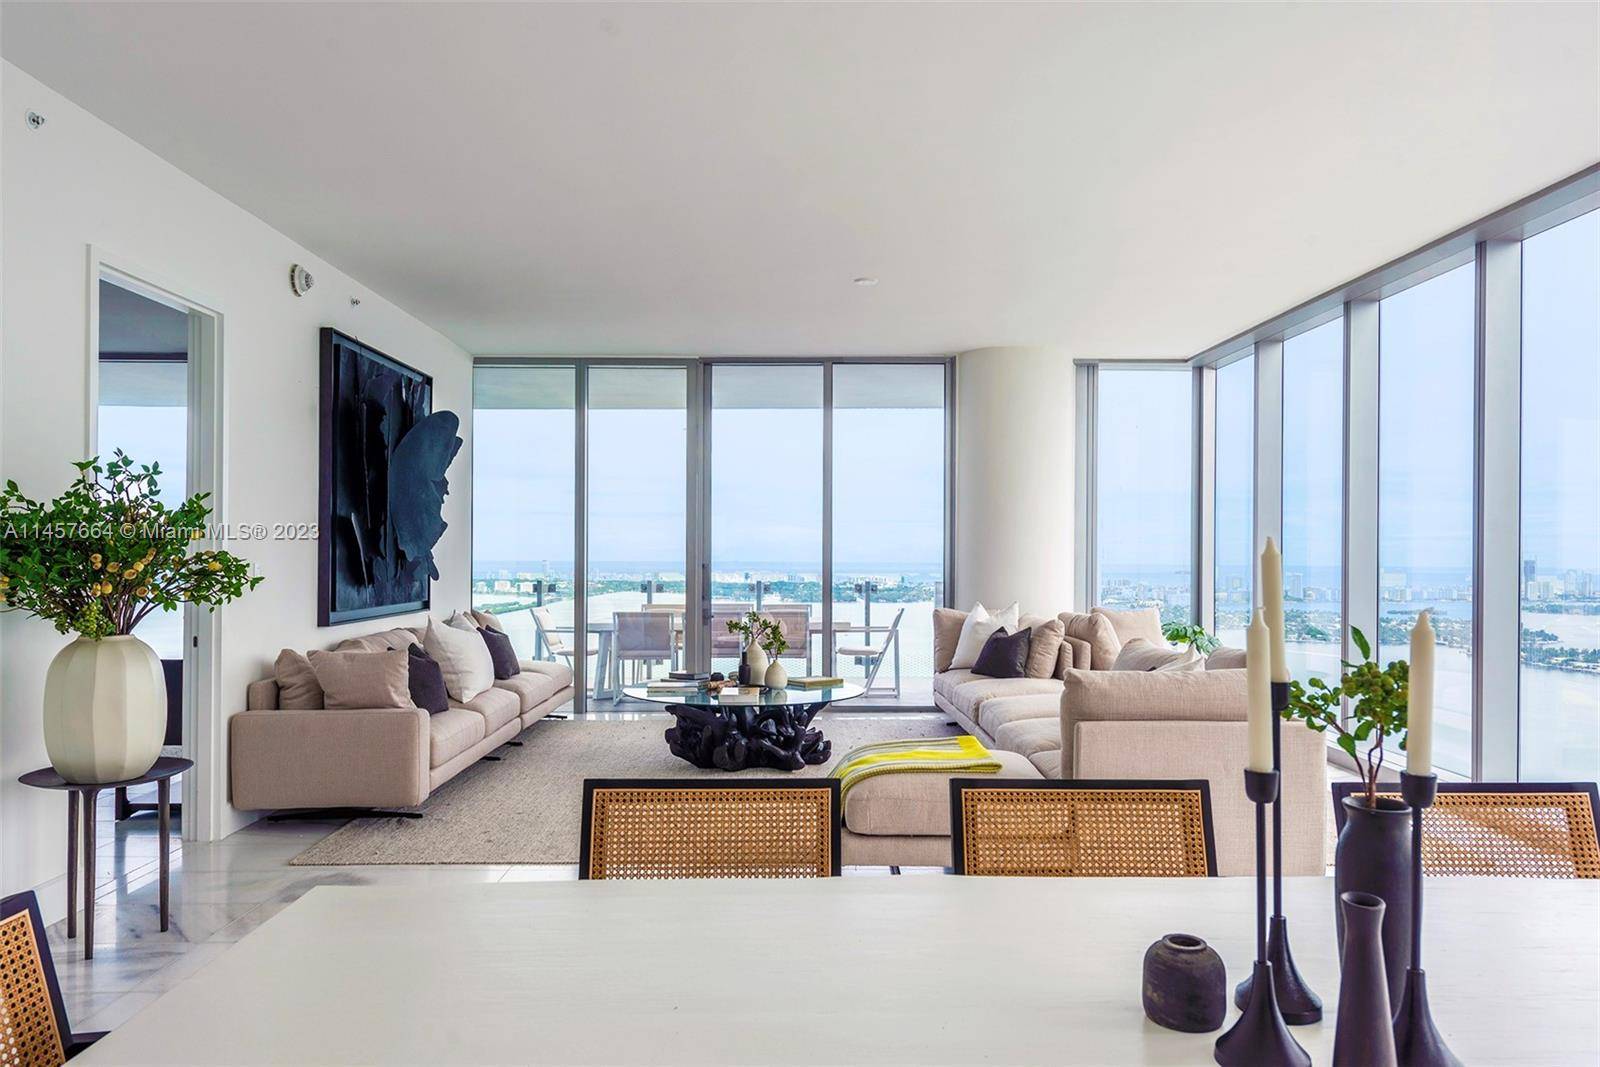 Priced to sell ! Four floors below the penthouse with 270 degree ocean, bay and city views, this spacious residence has it all.